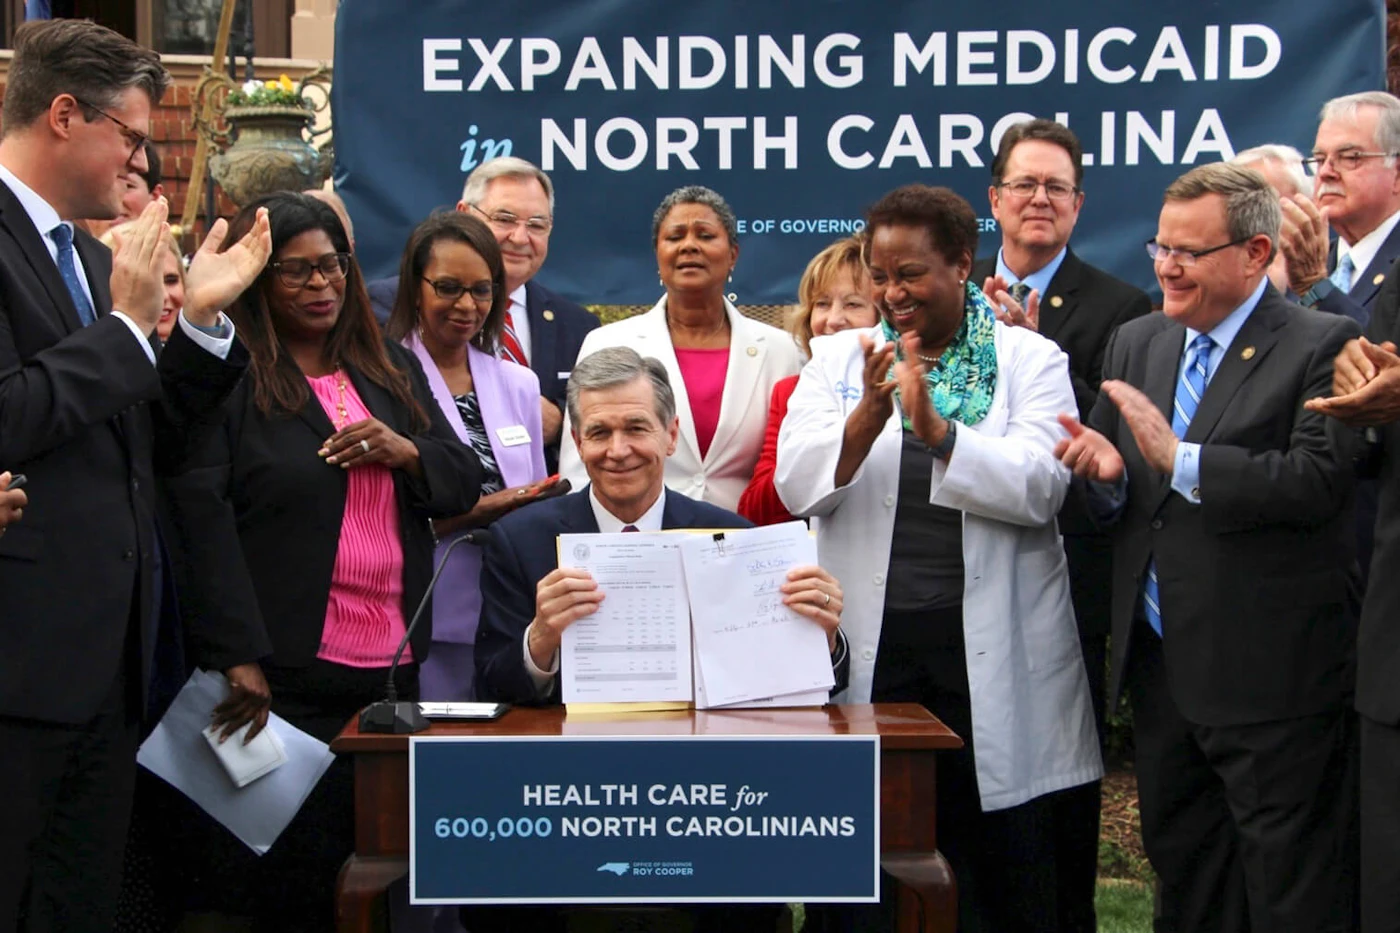 North Carolina Democratic Gov. Roy Cooper signs a Medicaid expansion law at the Executive Mansion on Monday, March 27, 2023, in Raleigh, N.C. (AP Photo/Hannah Schoenbaum)